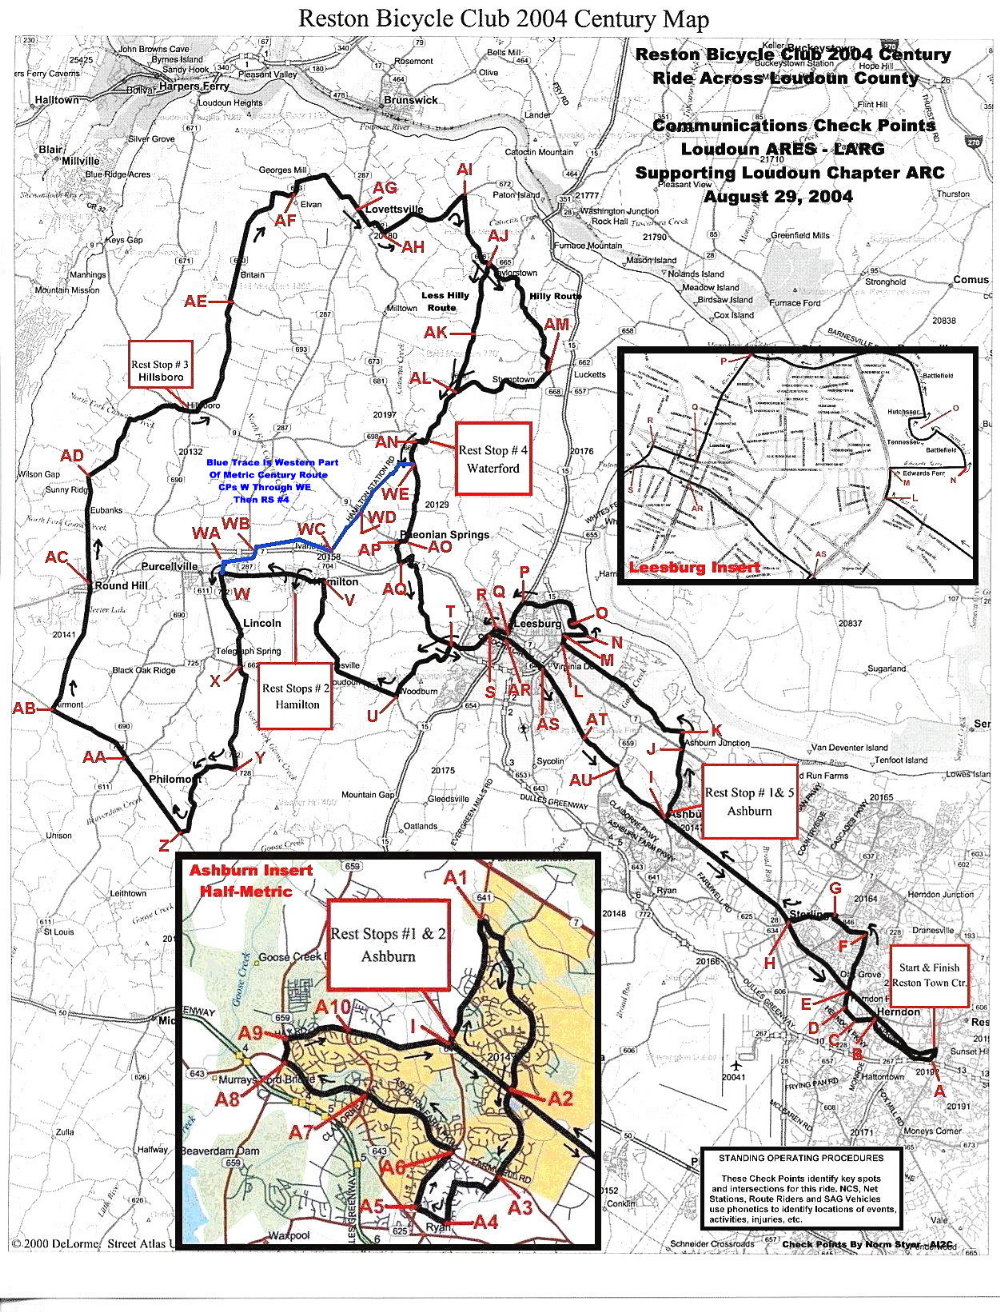 This map shows all three routes to be used by the Reston Bicycle Club. Communications check points have been incorporated to aid in support operations. CP by Norm Styer - AI2C of Clarkes Gap, VA.